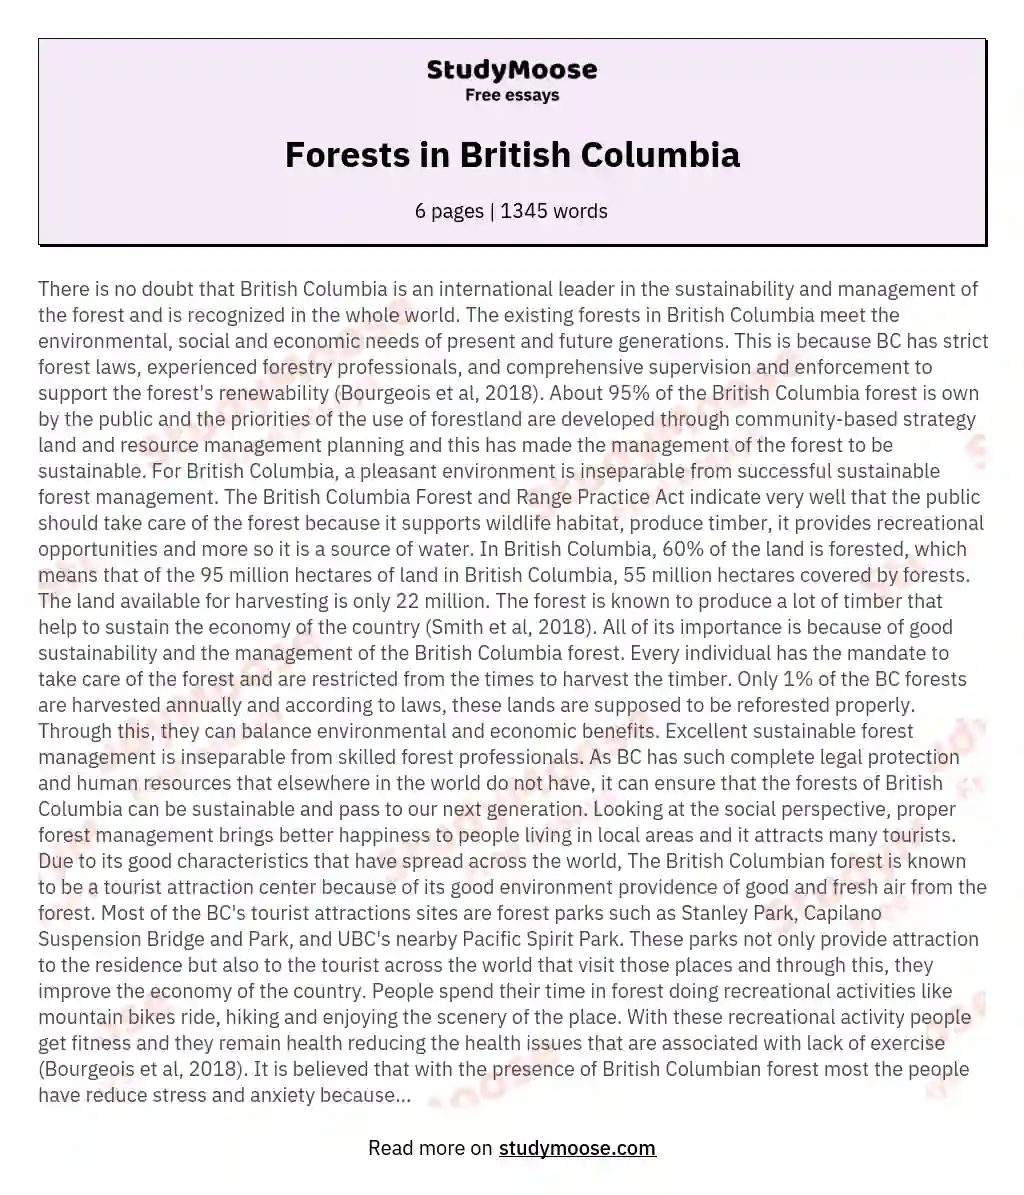 Forests in British Columbia essay